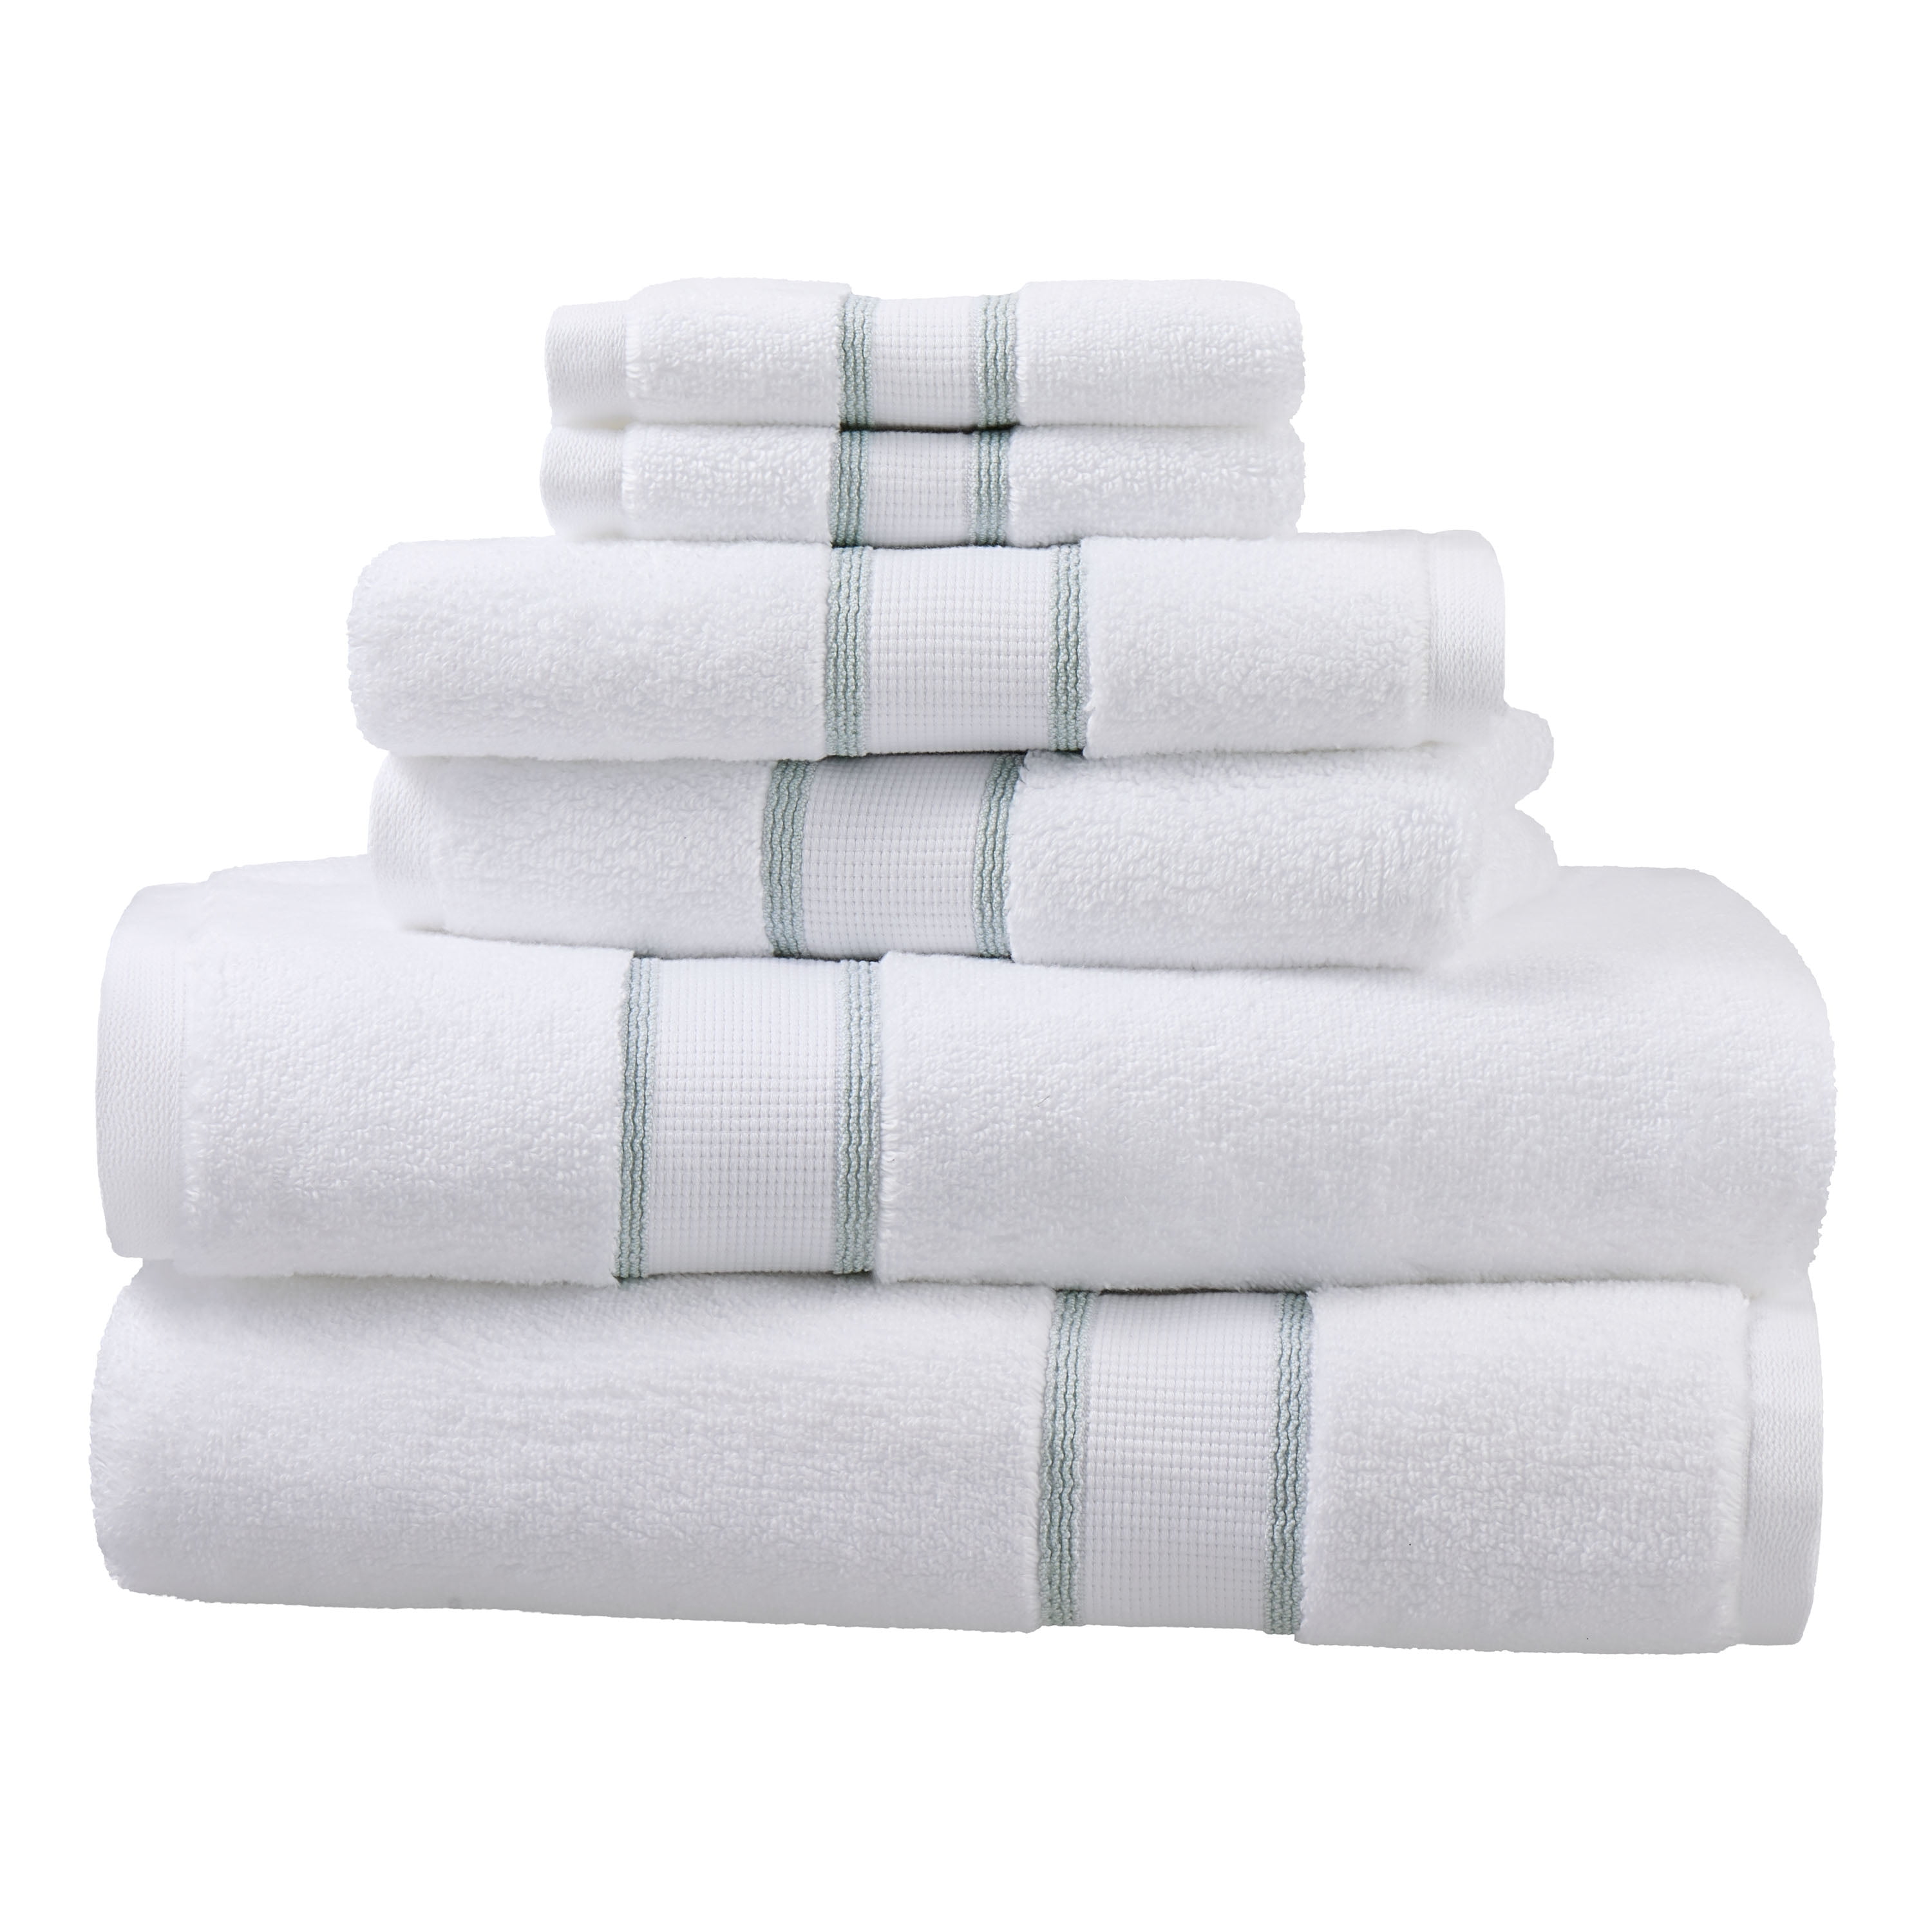 8 pc Hotel Collection DOTTED STRIPE SPA TOWEL ENSEMBLE Bath Hand